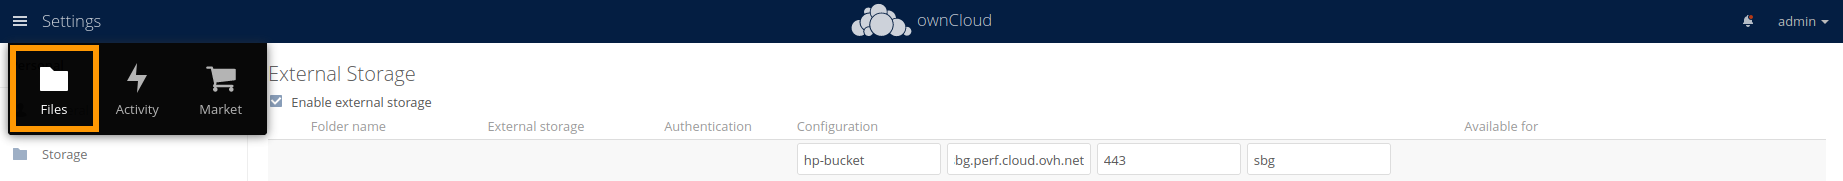 Owncloud open Files